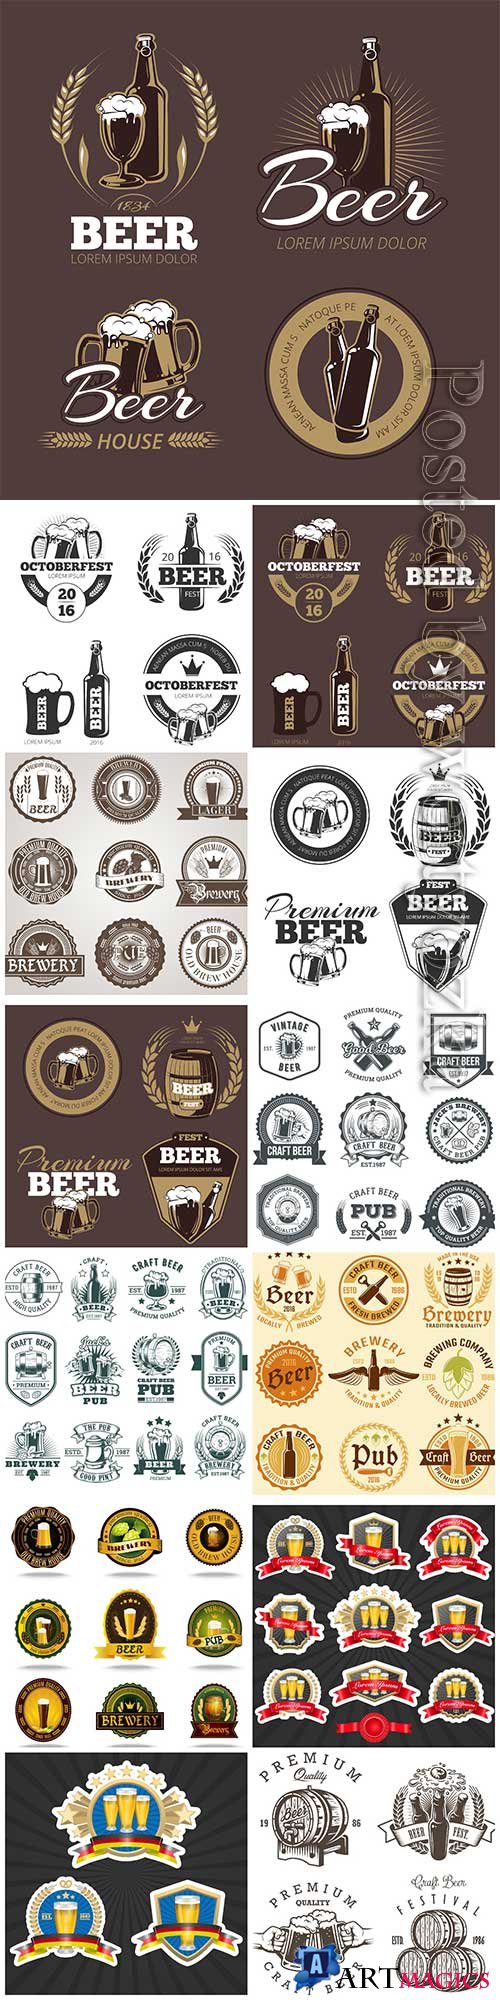 Beer label templates for beer house, brewing company, pub and bar